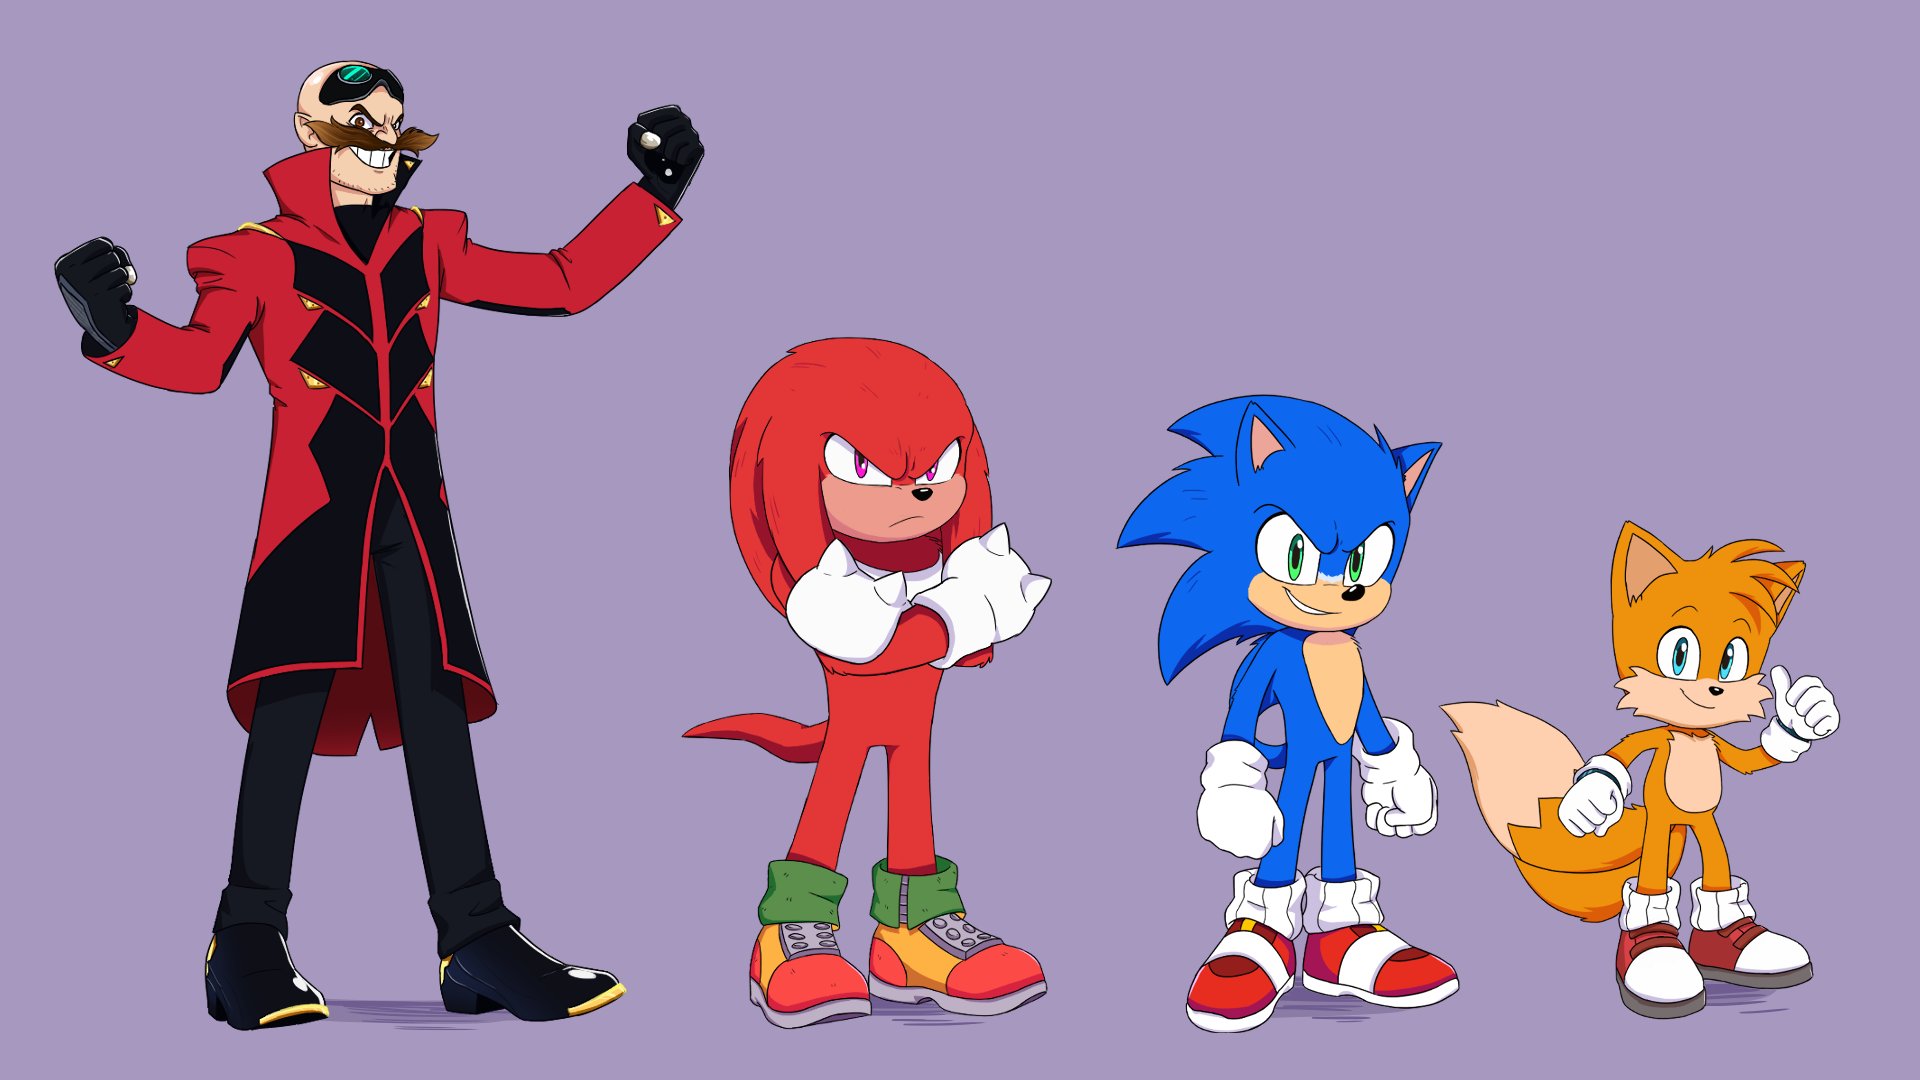 knuckles the echidna, movie, sonic the hedgehog 2, doctor eggman, miles 'tails' prower, sonic the hedgehog, sonic